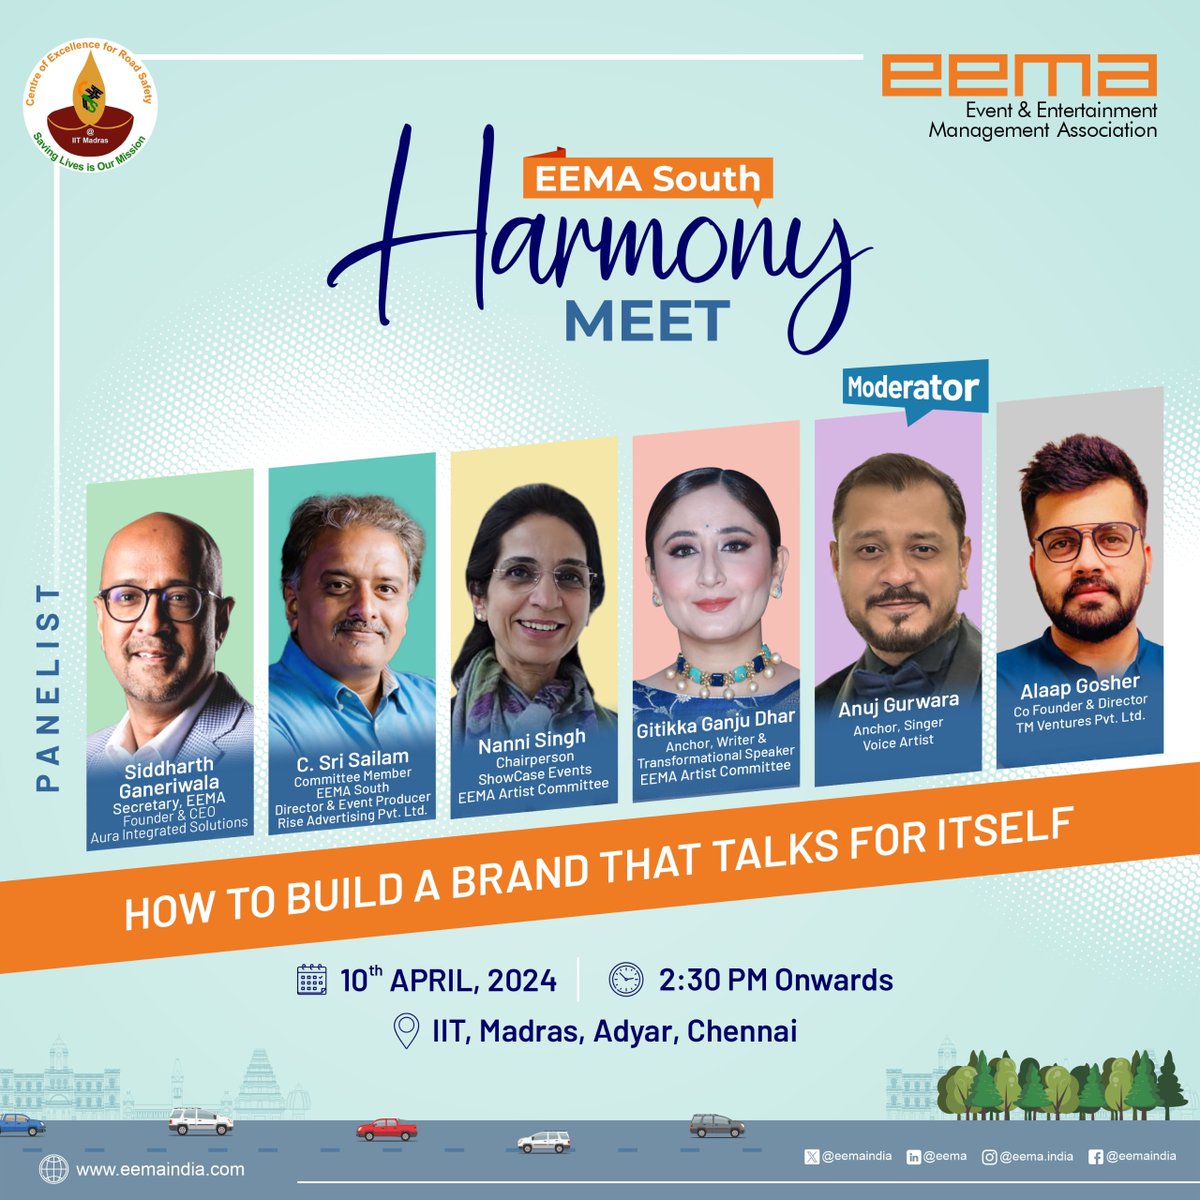 EEMA South Harmony Meet: Join us on April 10th, 2:30pm onward at IIT Madras. Join us for an exciting event featuring industry experts unveiling the latest event and brand trends, sharing expertise, and inspiring stories. Hosted by Anuj Gurwara. Don't miss out!